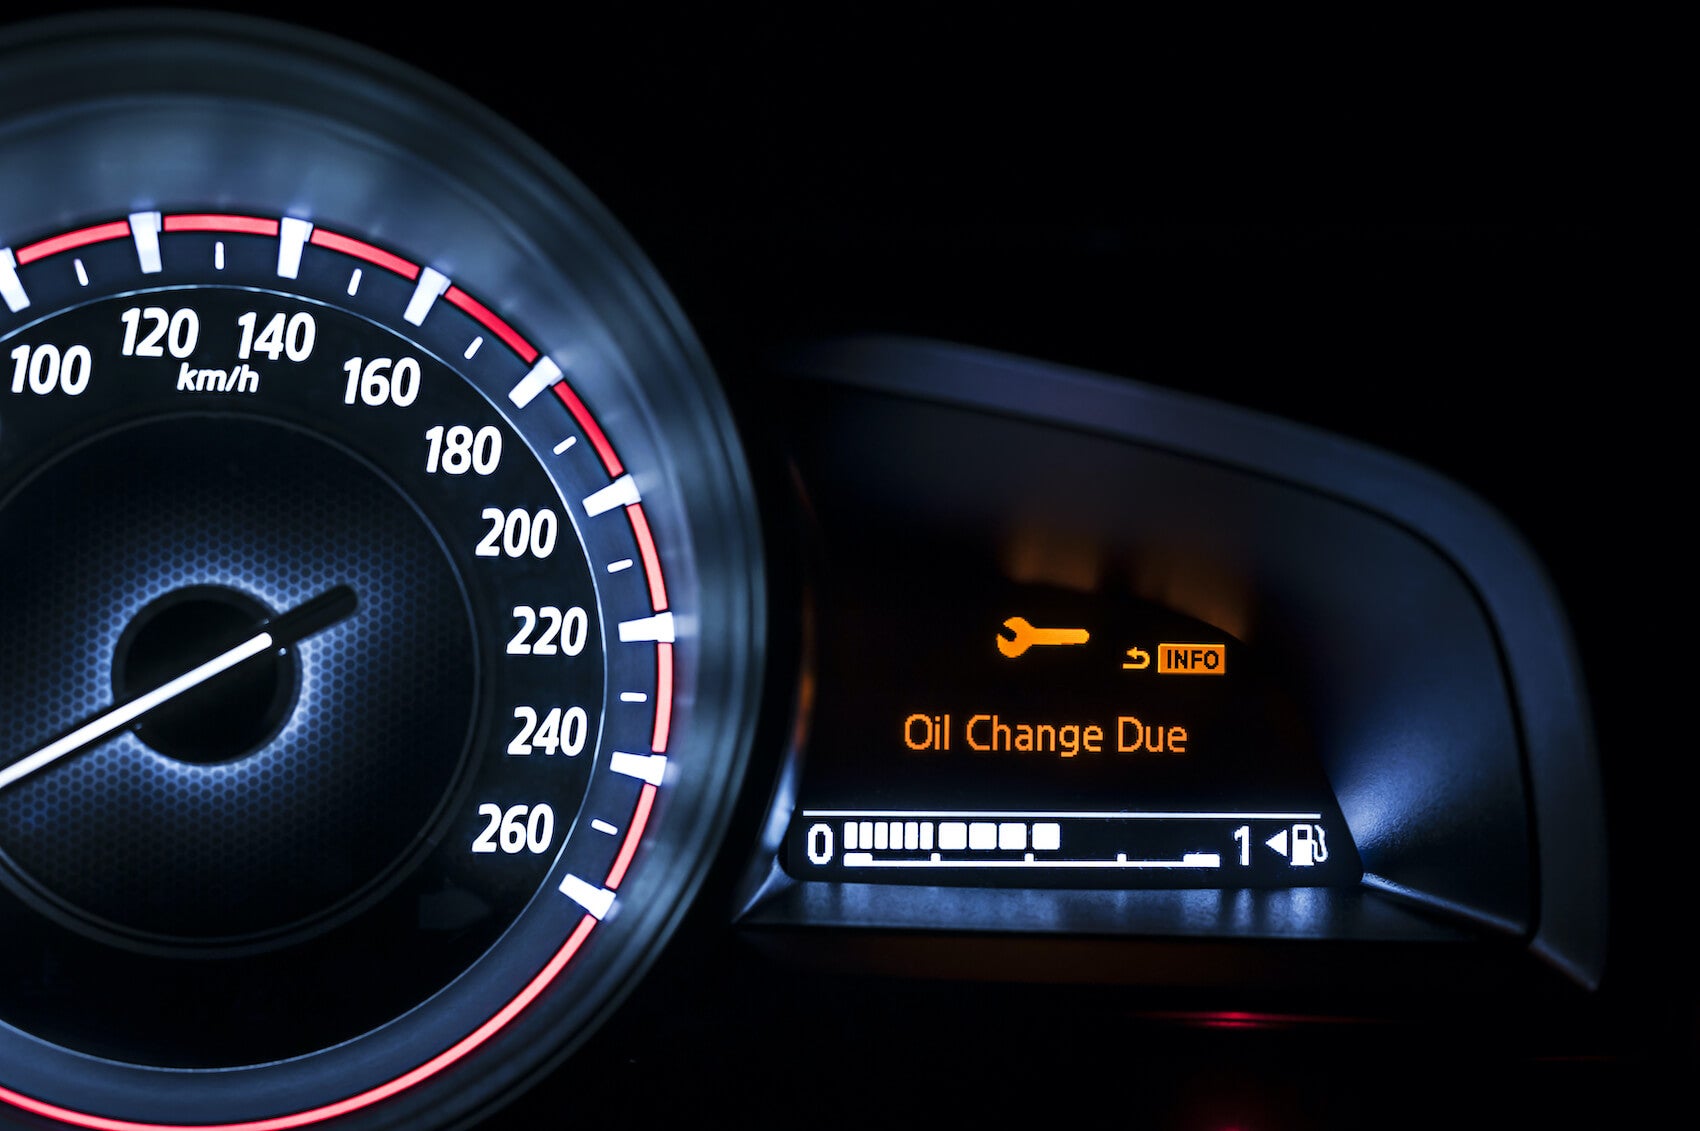 When to Get an Oil Change